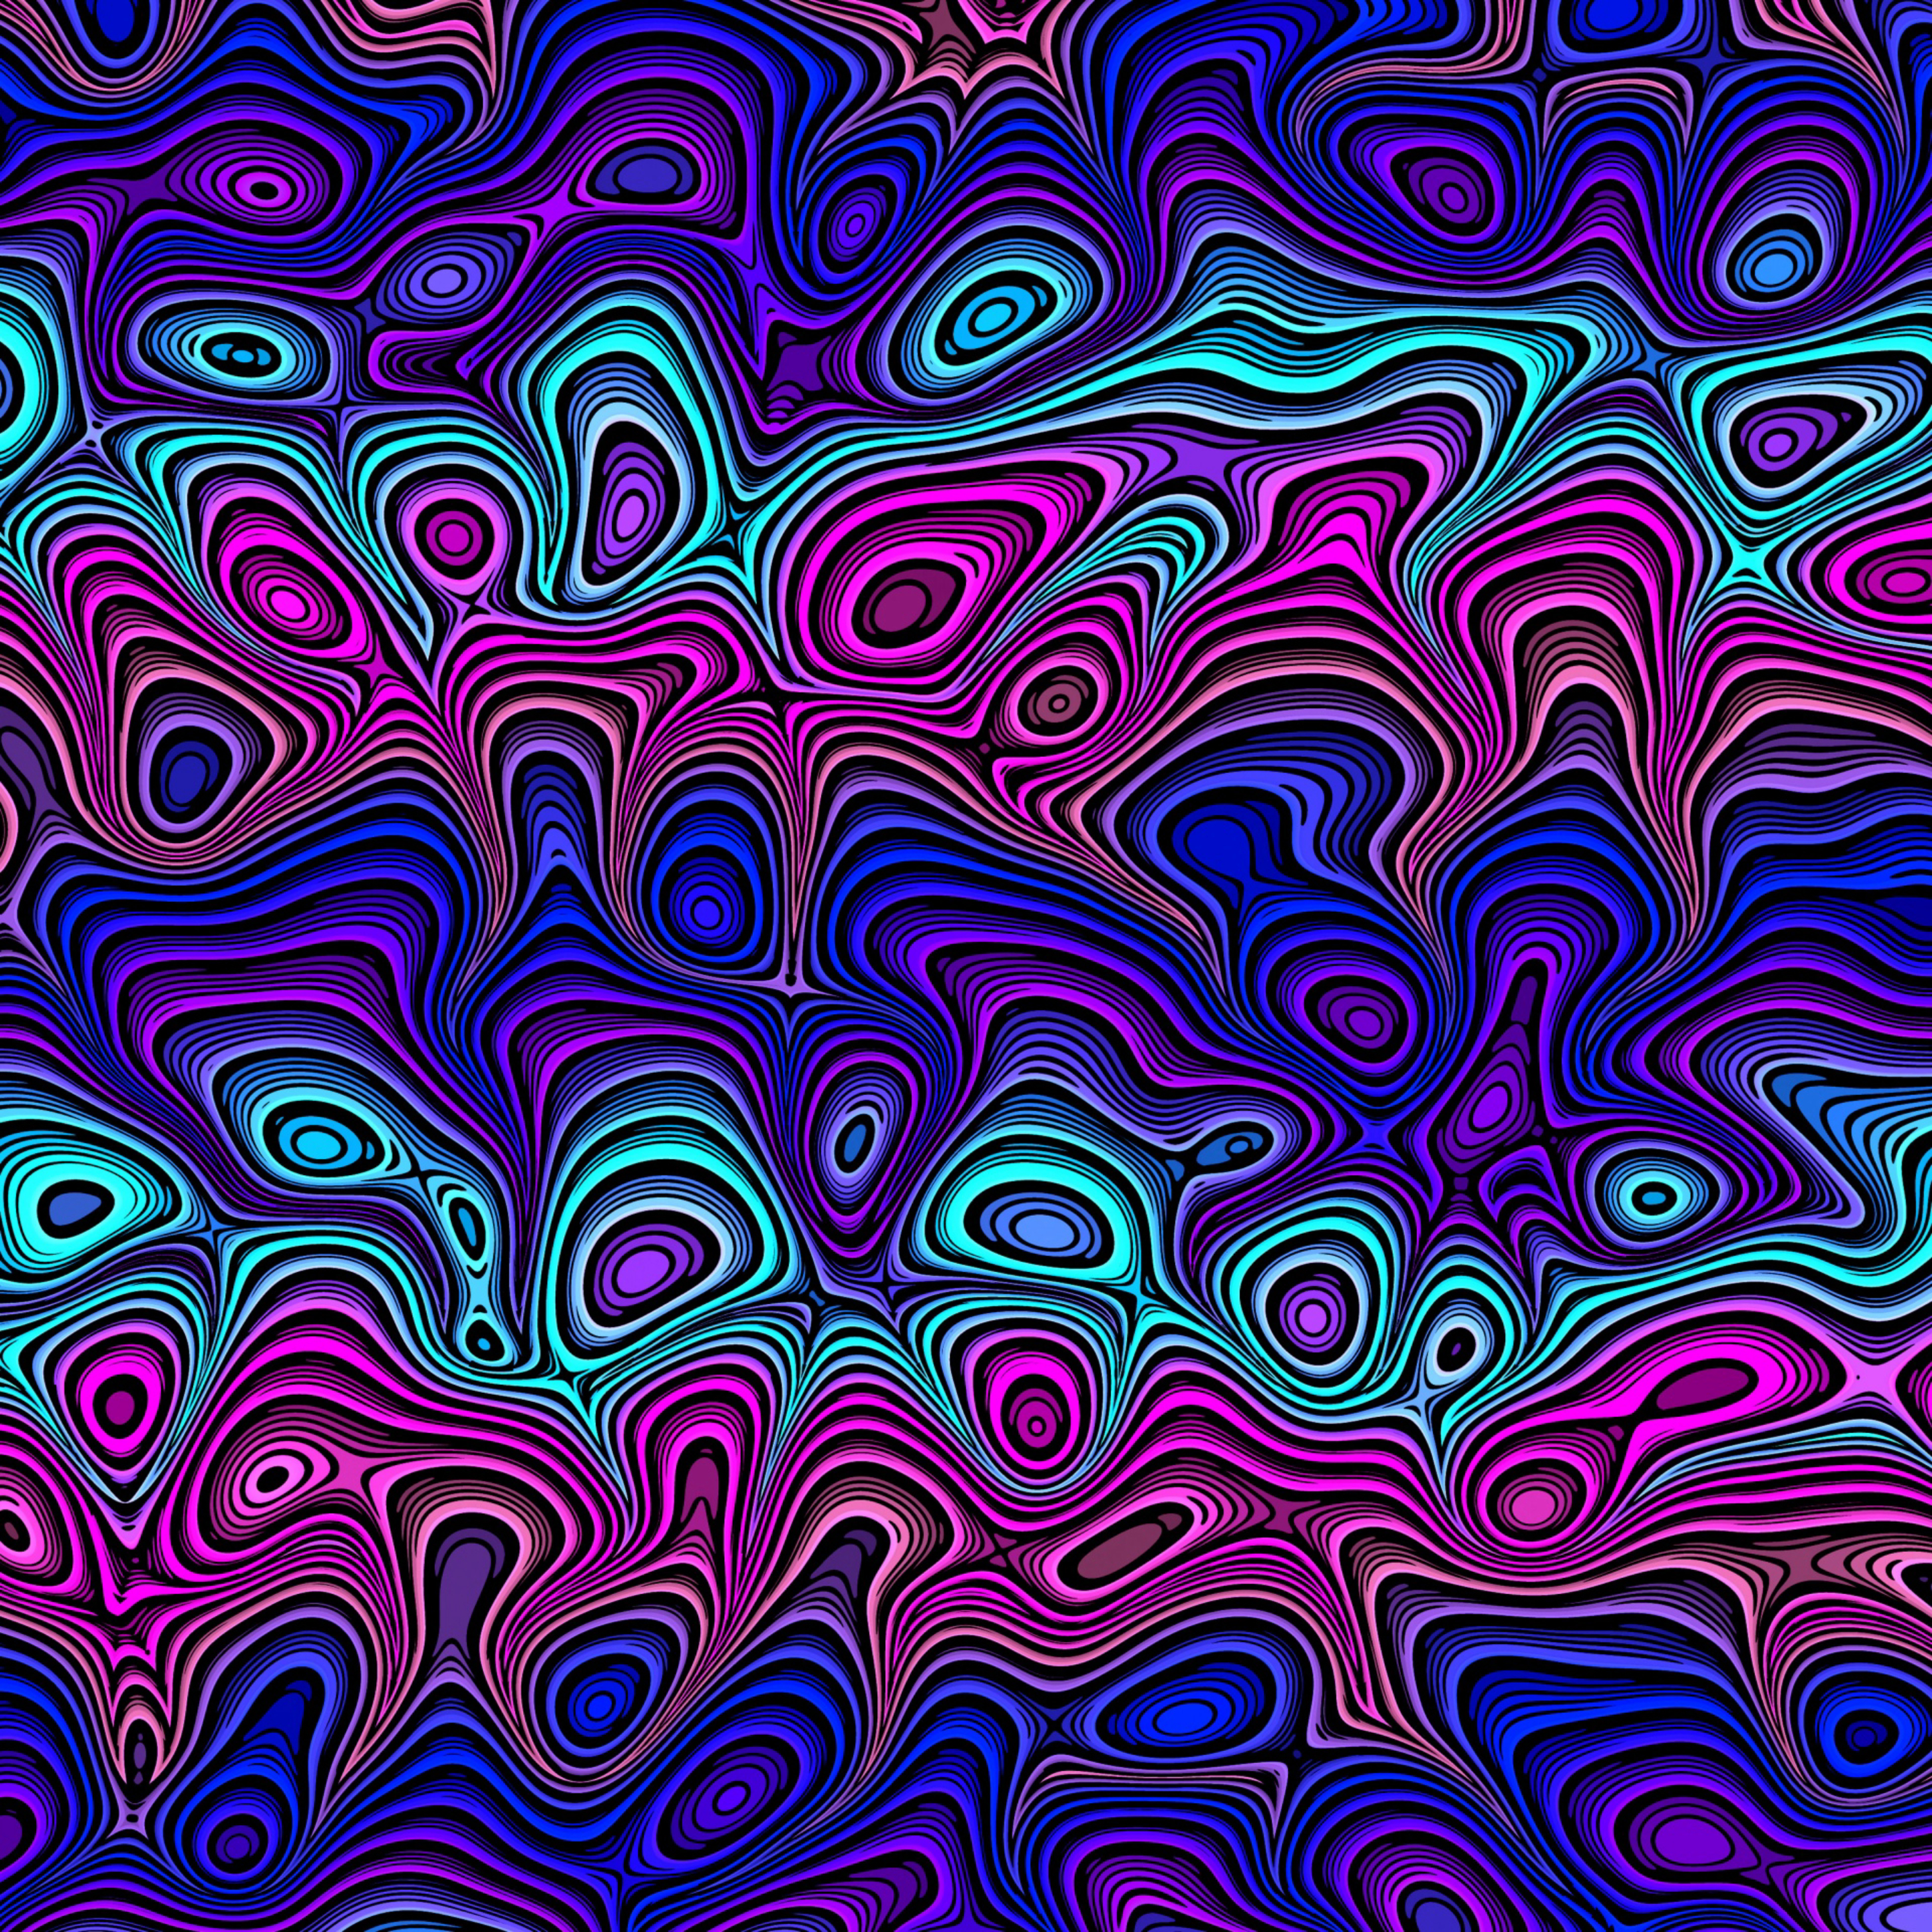 motley, abstract, multicolored, lines, wavy, swirling, involute